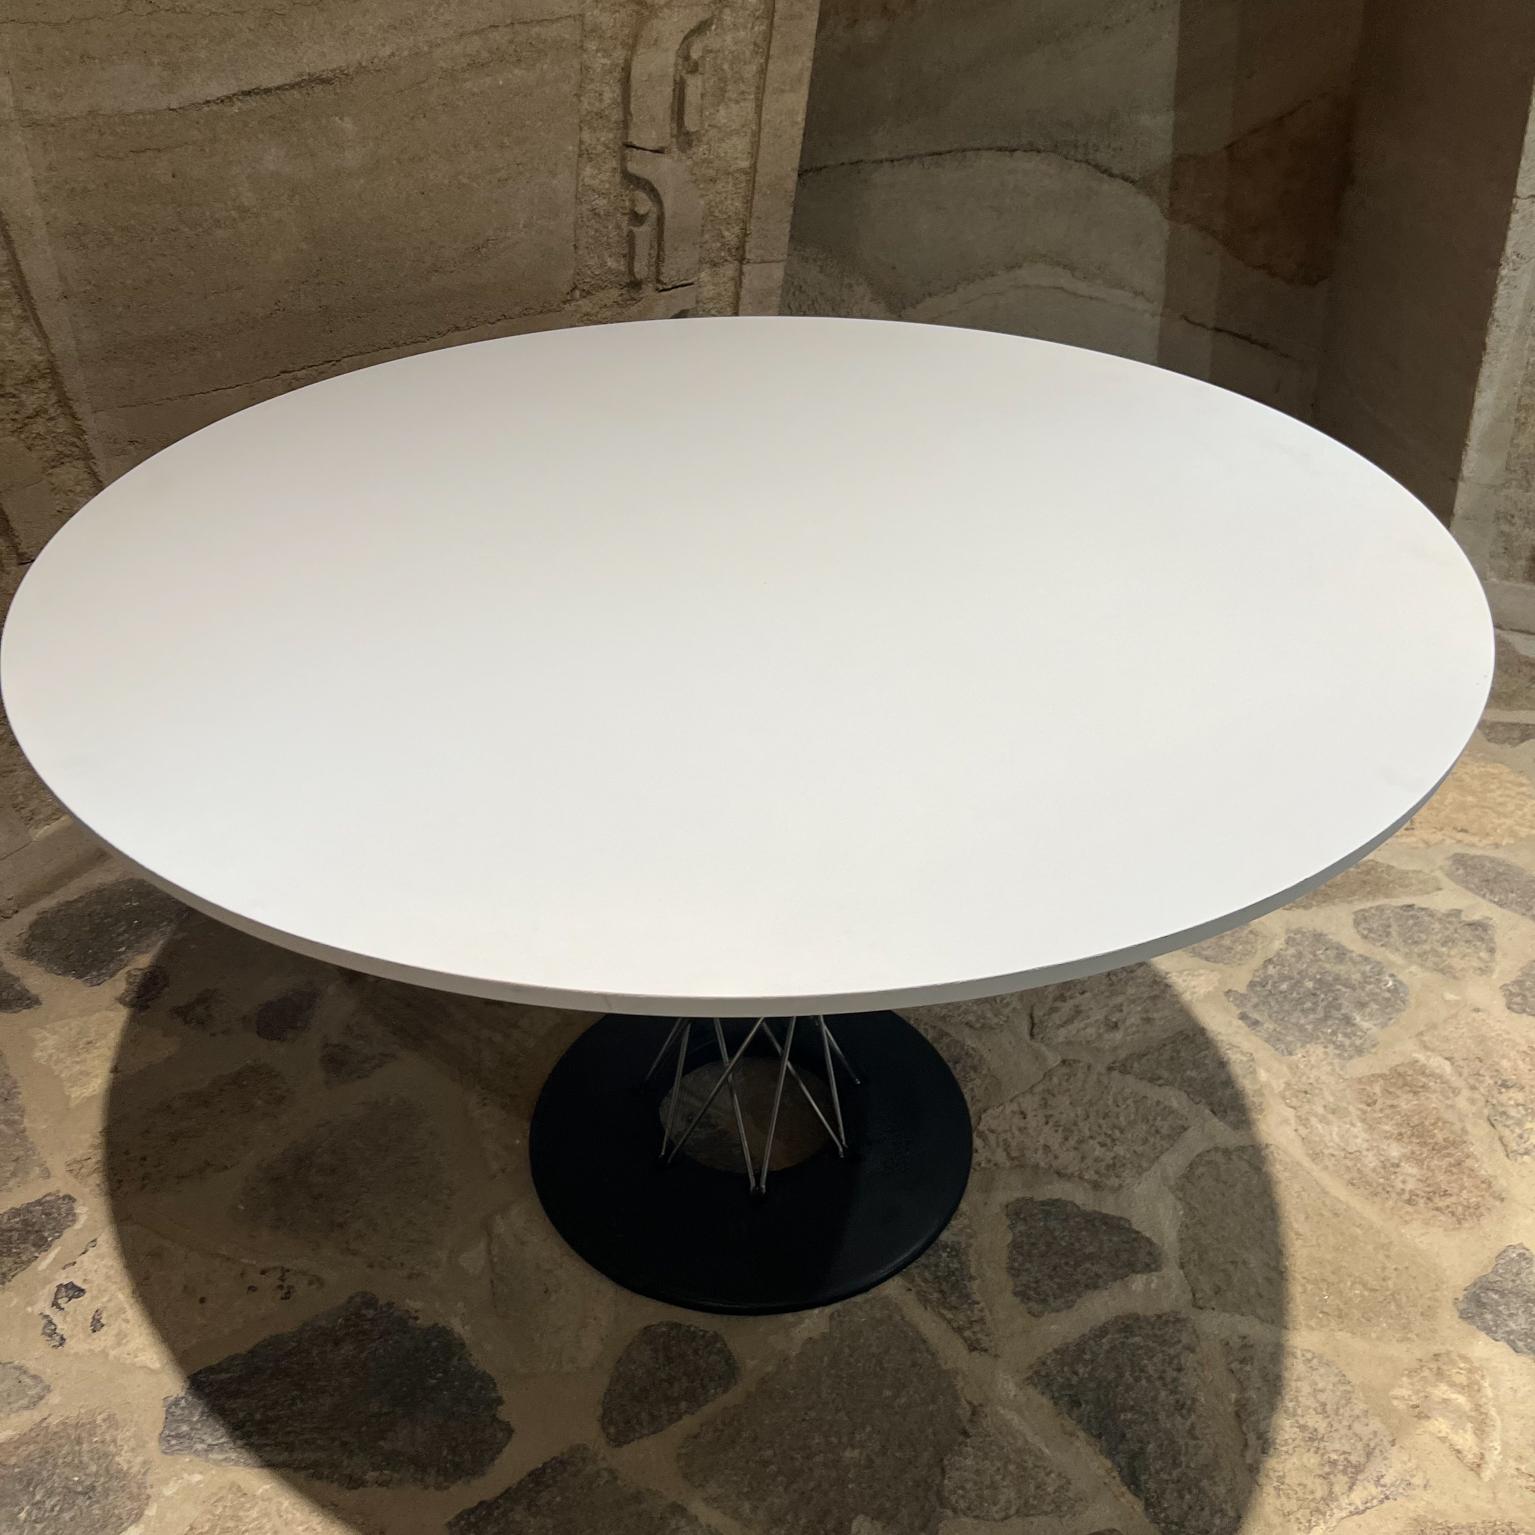 1957 Original Mod Cyclone Dining Table Isamu Noguchi for Knoll + New Top For Sale 2